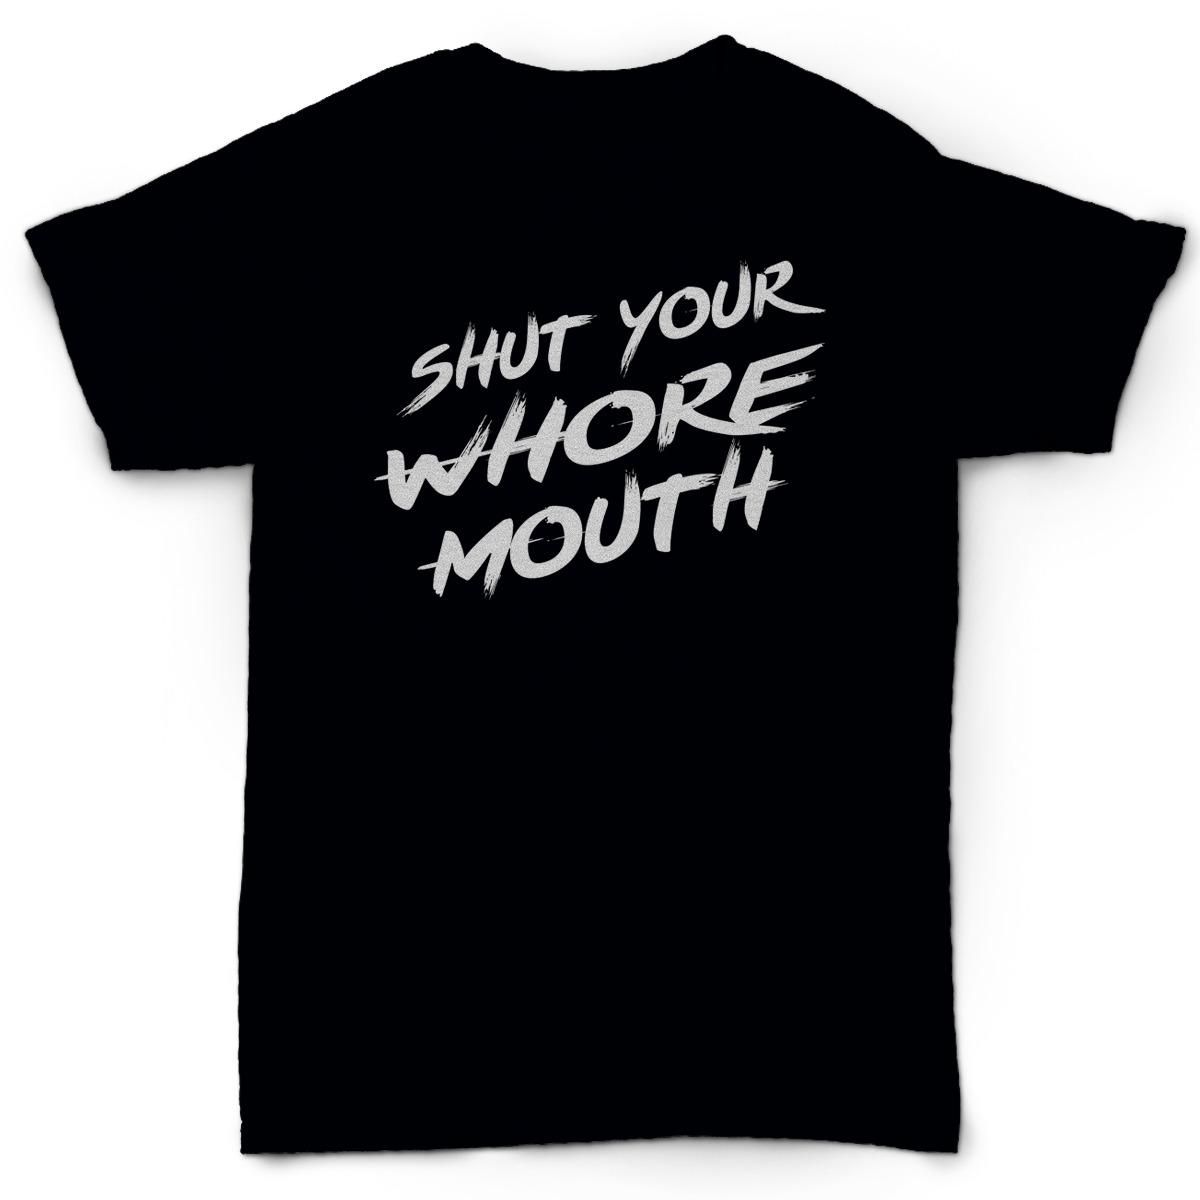 carmel rouhani recommends Shut Your Whore Mouth